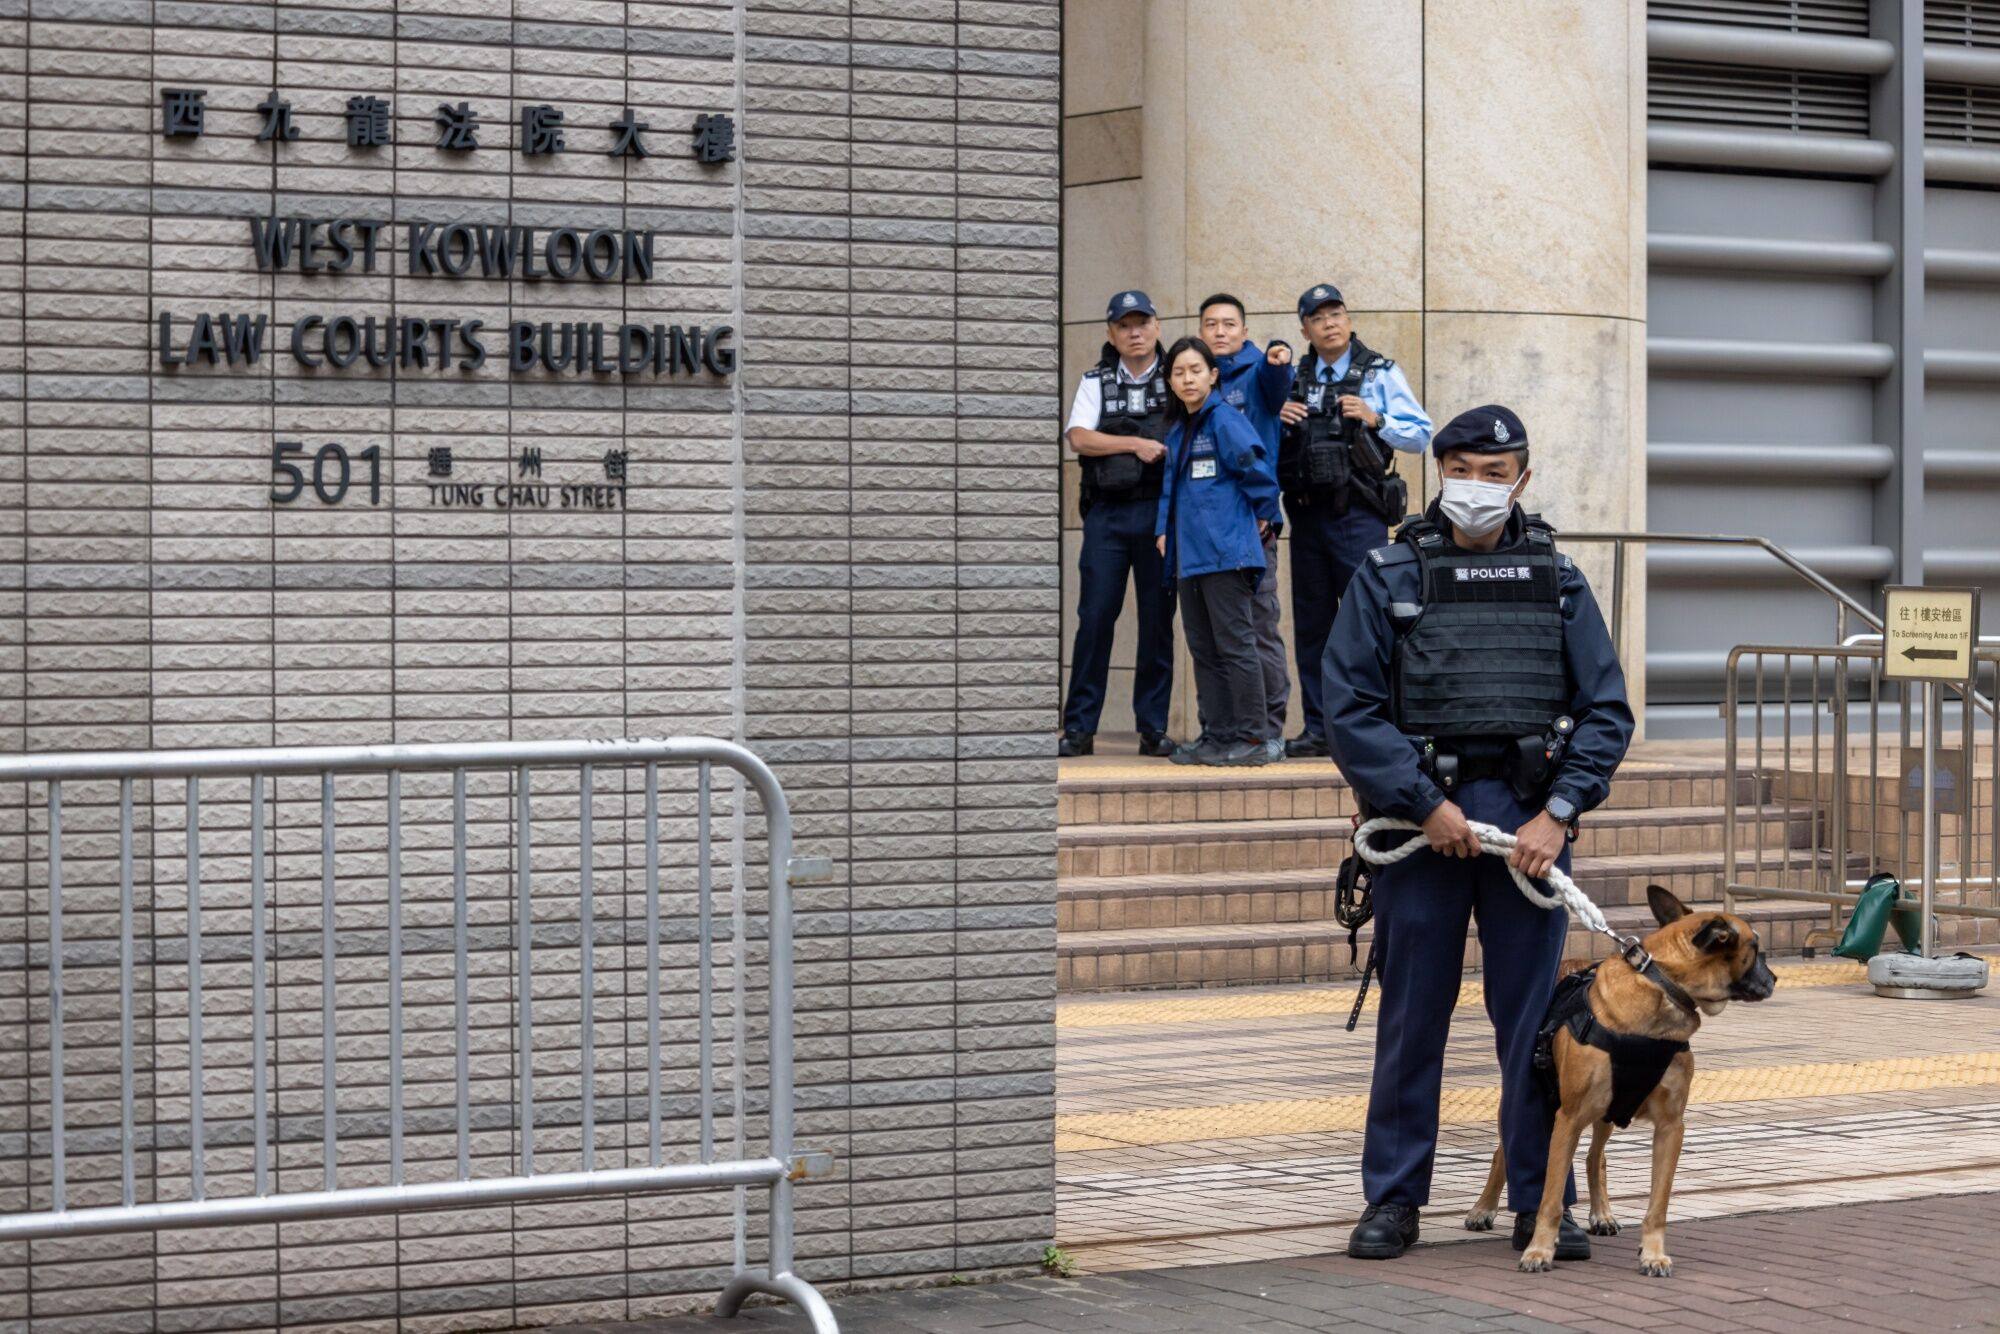 Jimmy Lai’s trial is being heard at West Kowloon Court. Photo: Bloomberg